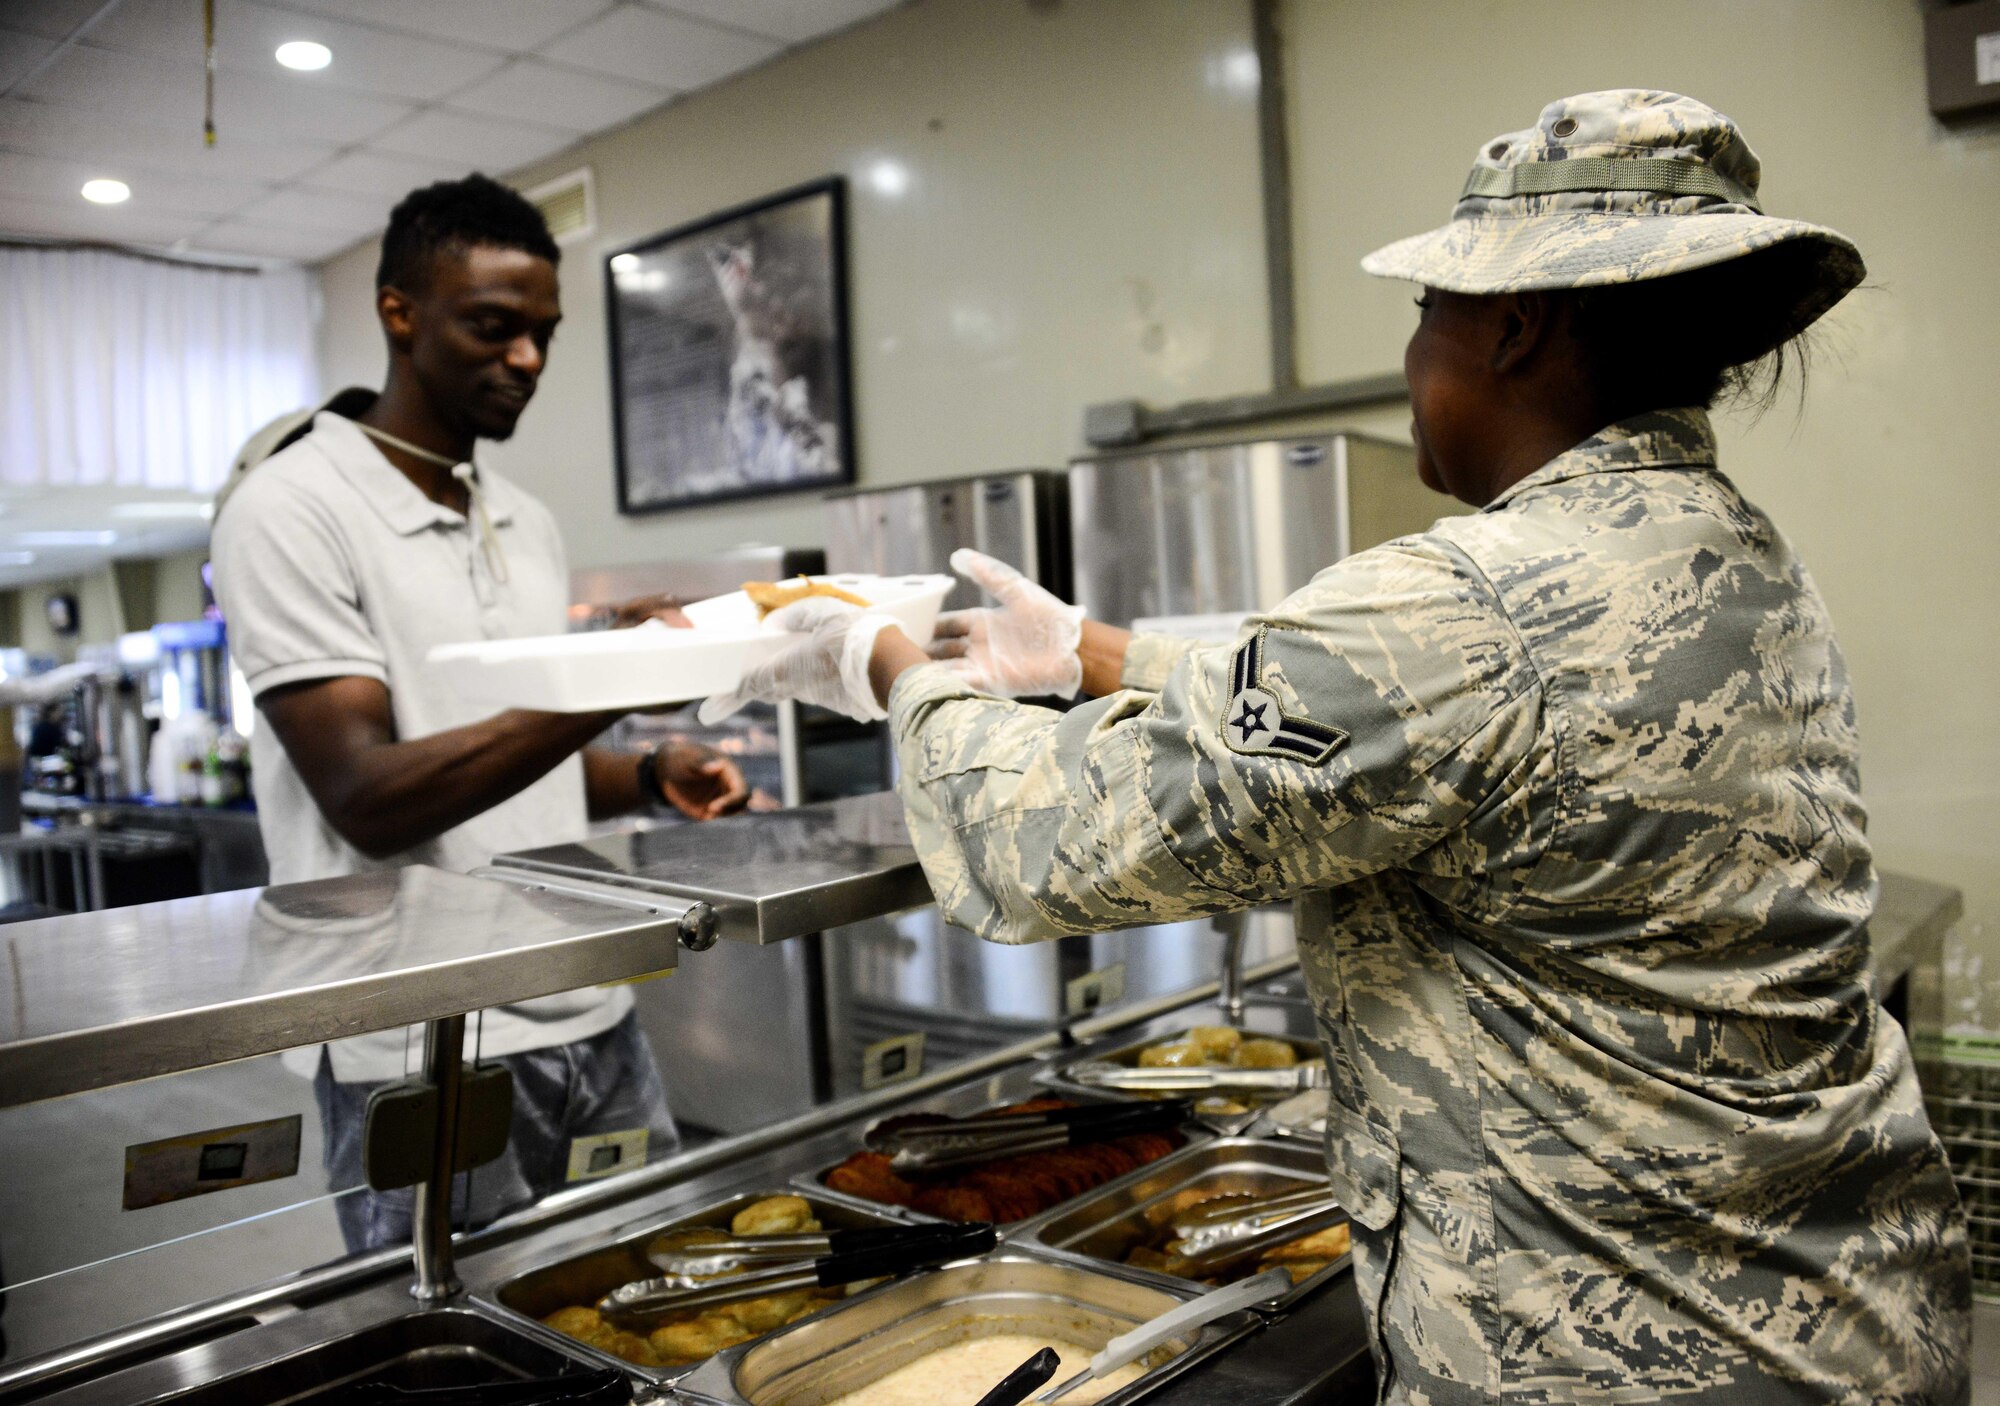 Airman 1st Class Shanette Whitehead, 379th Expeditionary Force Support Squadron service journeyman, serves a member food during the lunch meal in the Independence Dining Facility Sept. 20, 2016, at Al Udeid Air Base, Qatar. The dining facilities serve more than 500,000 meals per month, and they are supported by both contractors and EFSS personnel. (U.S. Air Force photo/Senior Airman Janelle Patiño/Released)